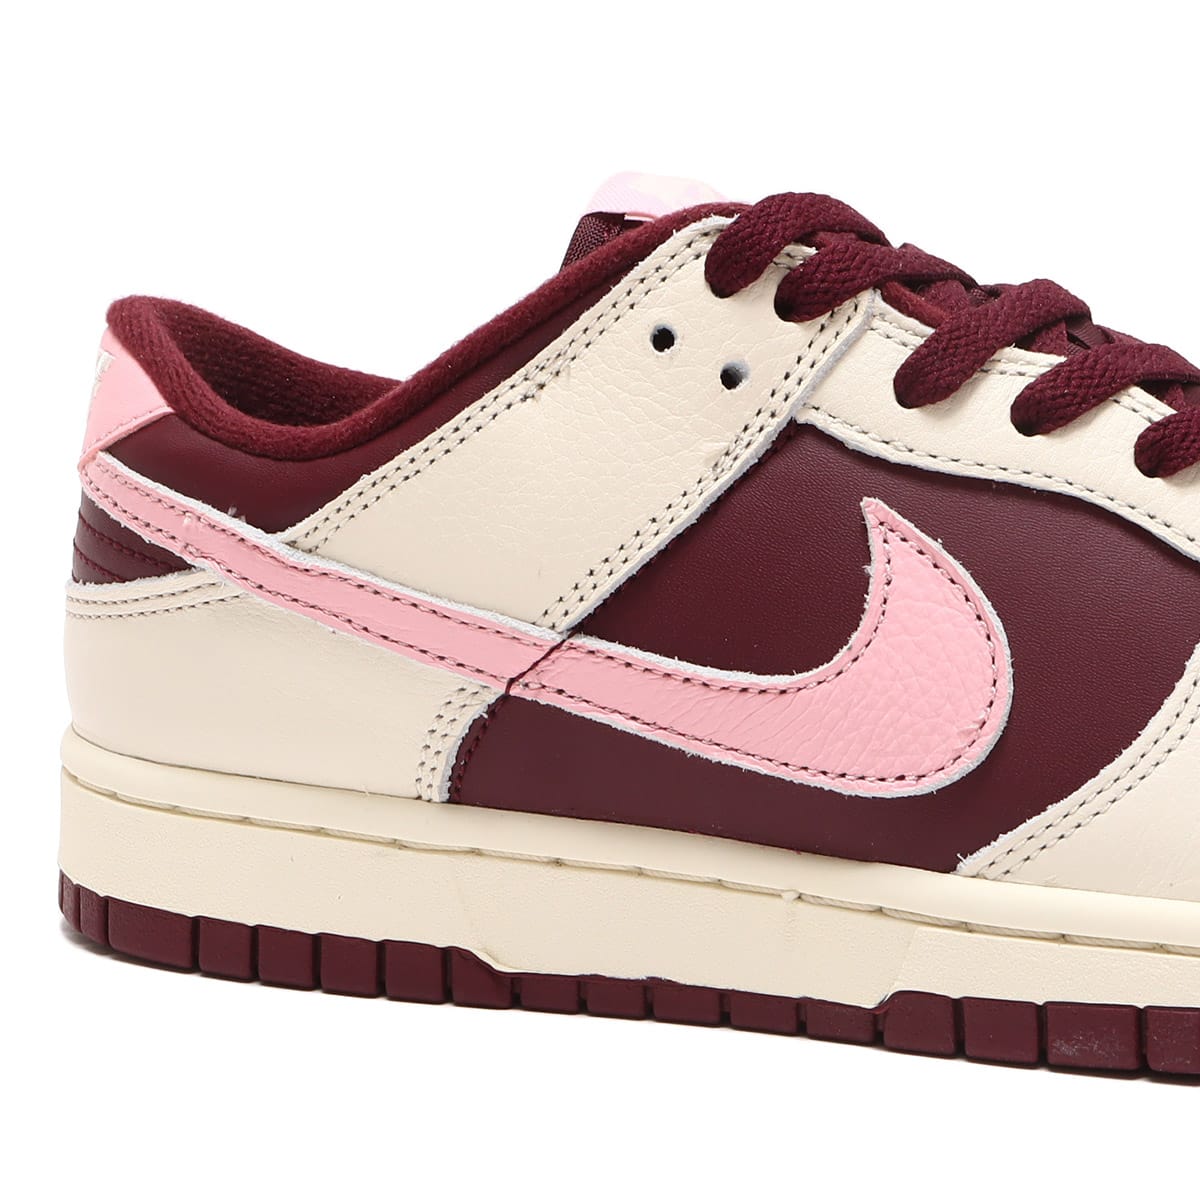 NIKE DUNK LOW RETRO PRM PALE IVORY/MED SOFT PINK-NIGHT MAROON 23SP-I